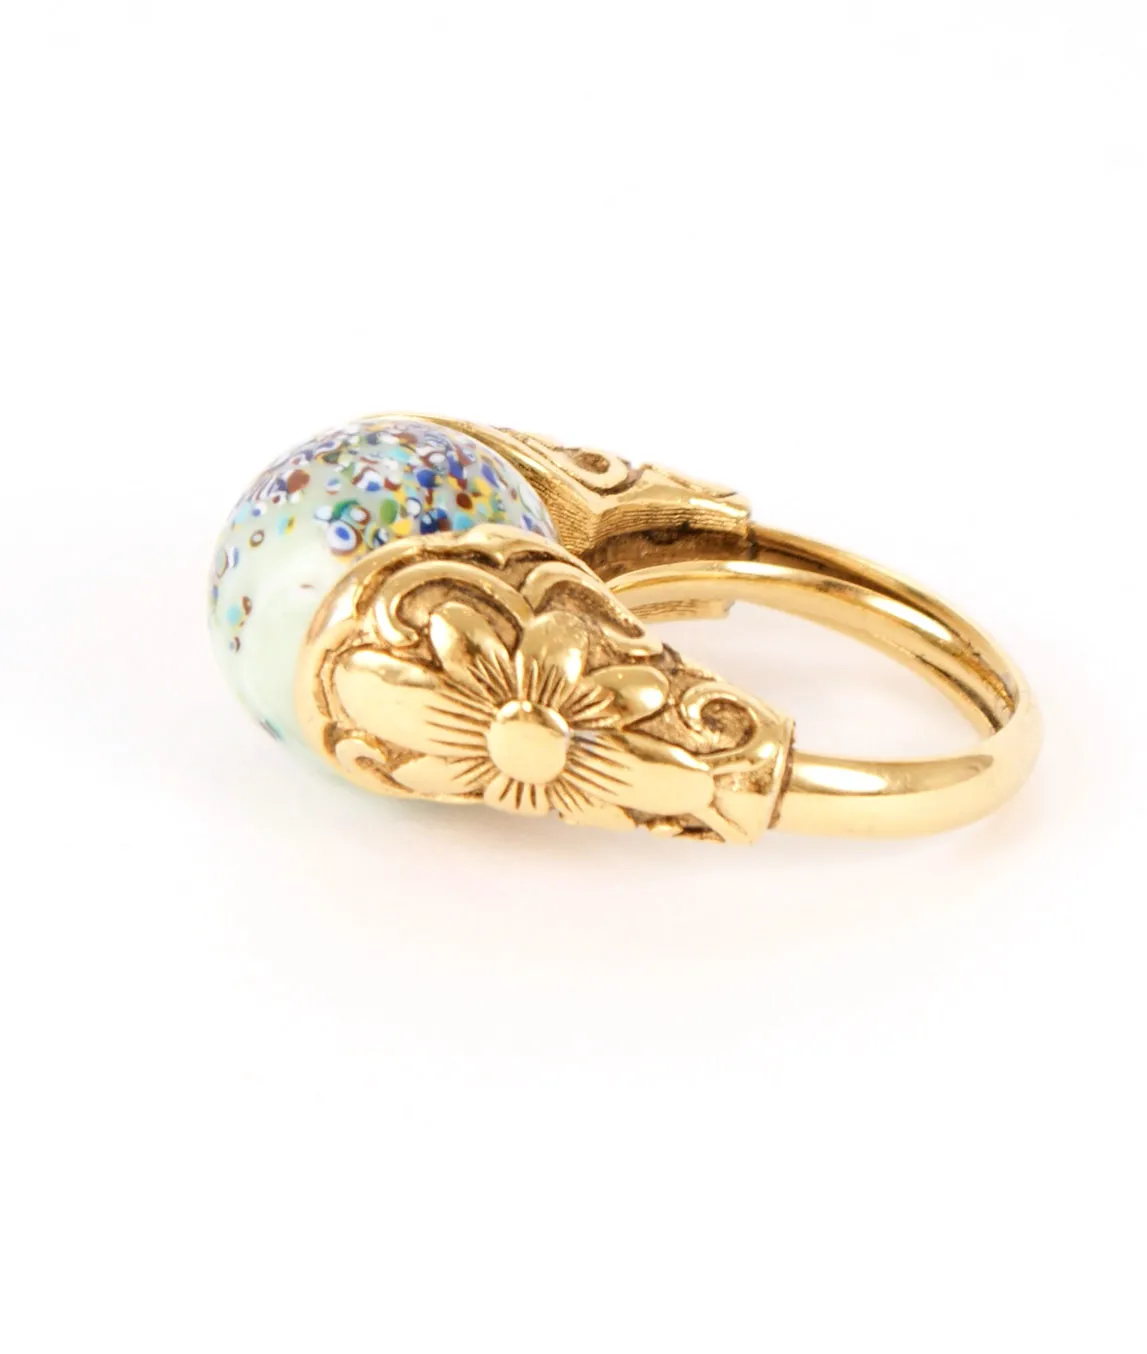 Trifari ring with flowers